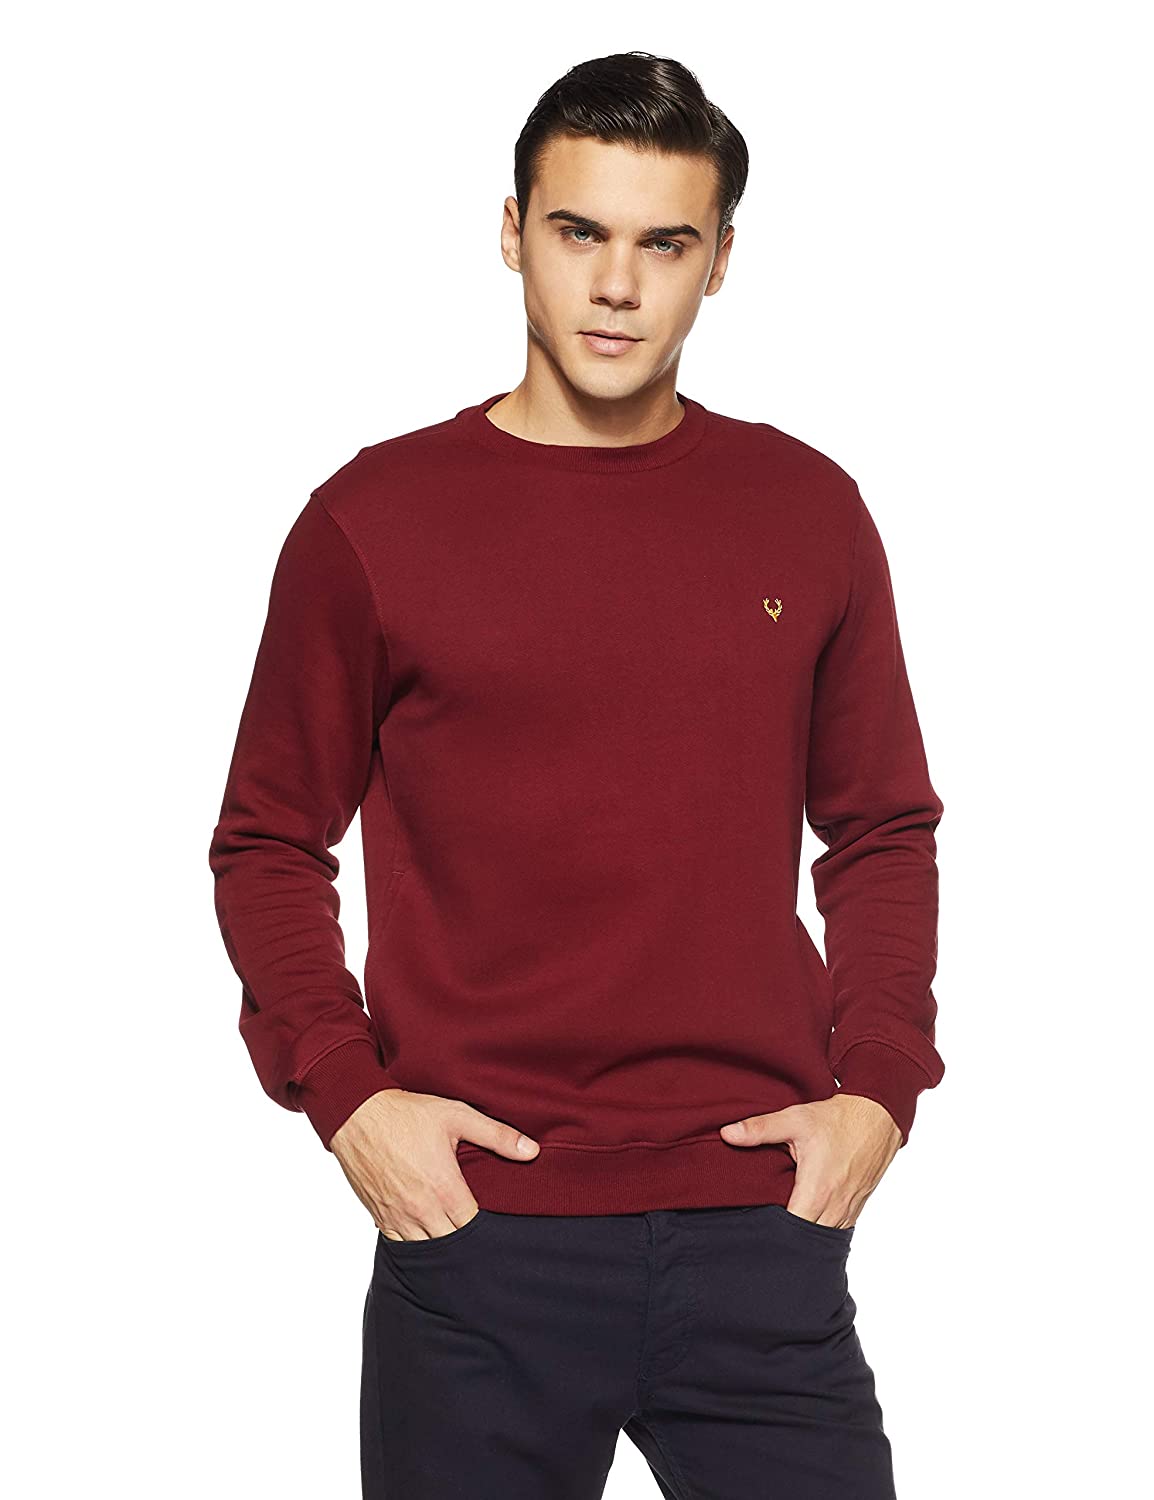 Amazon Deal: Branded Sweatshirts For Just Rs 600, Here Are 5 Brands With Deals On Winter Wear